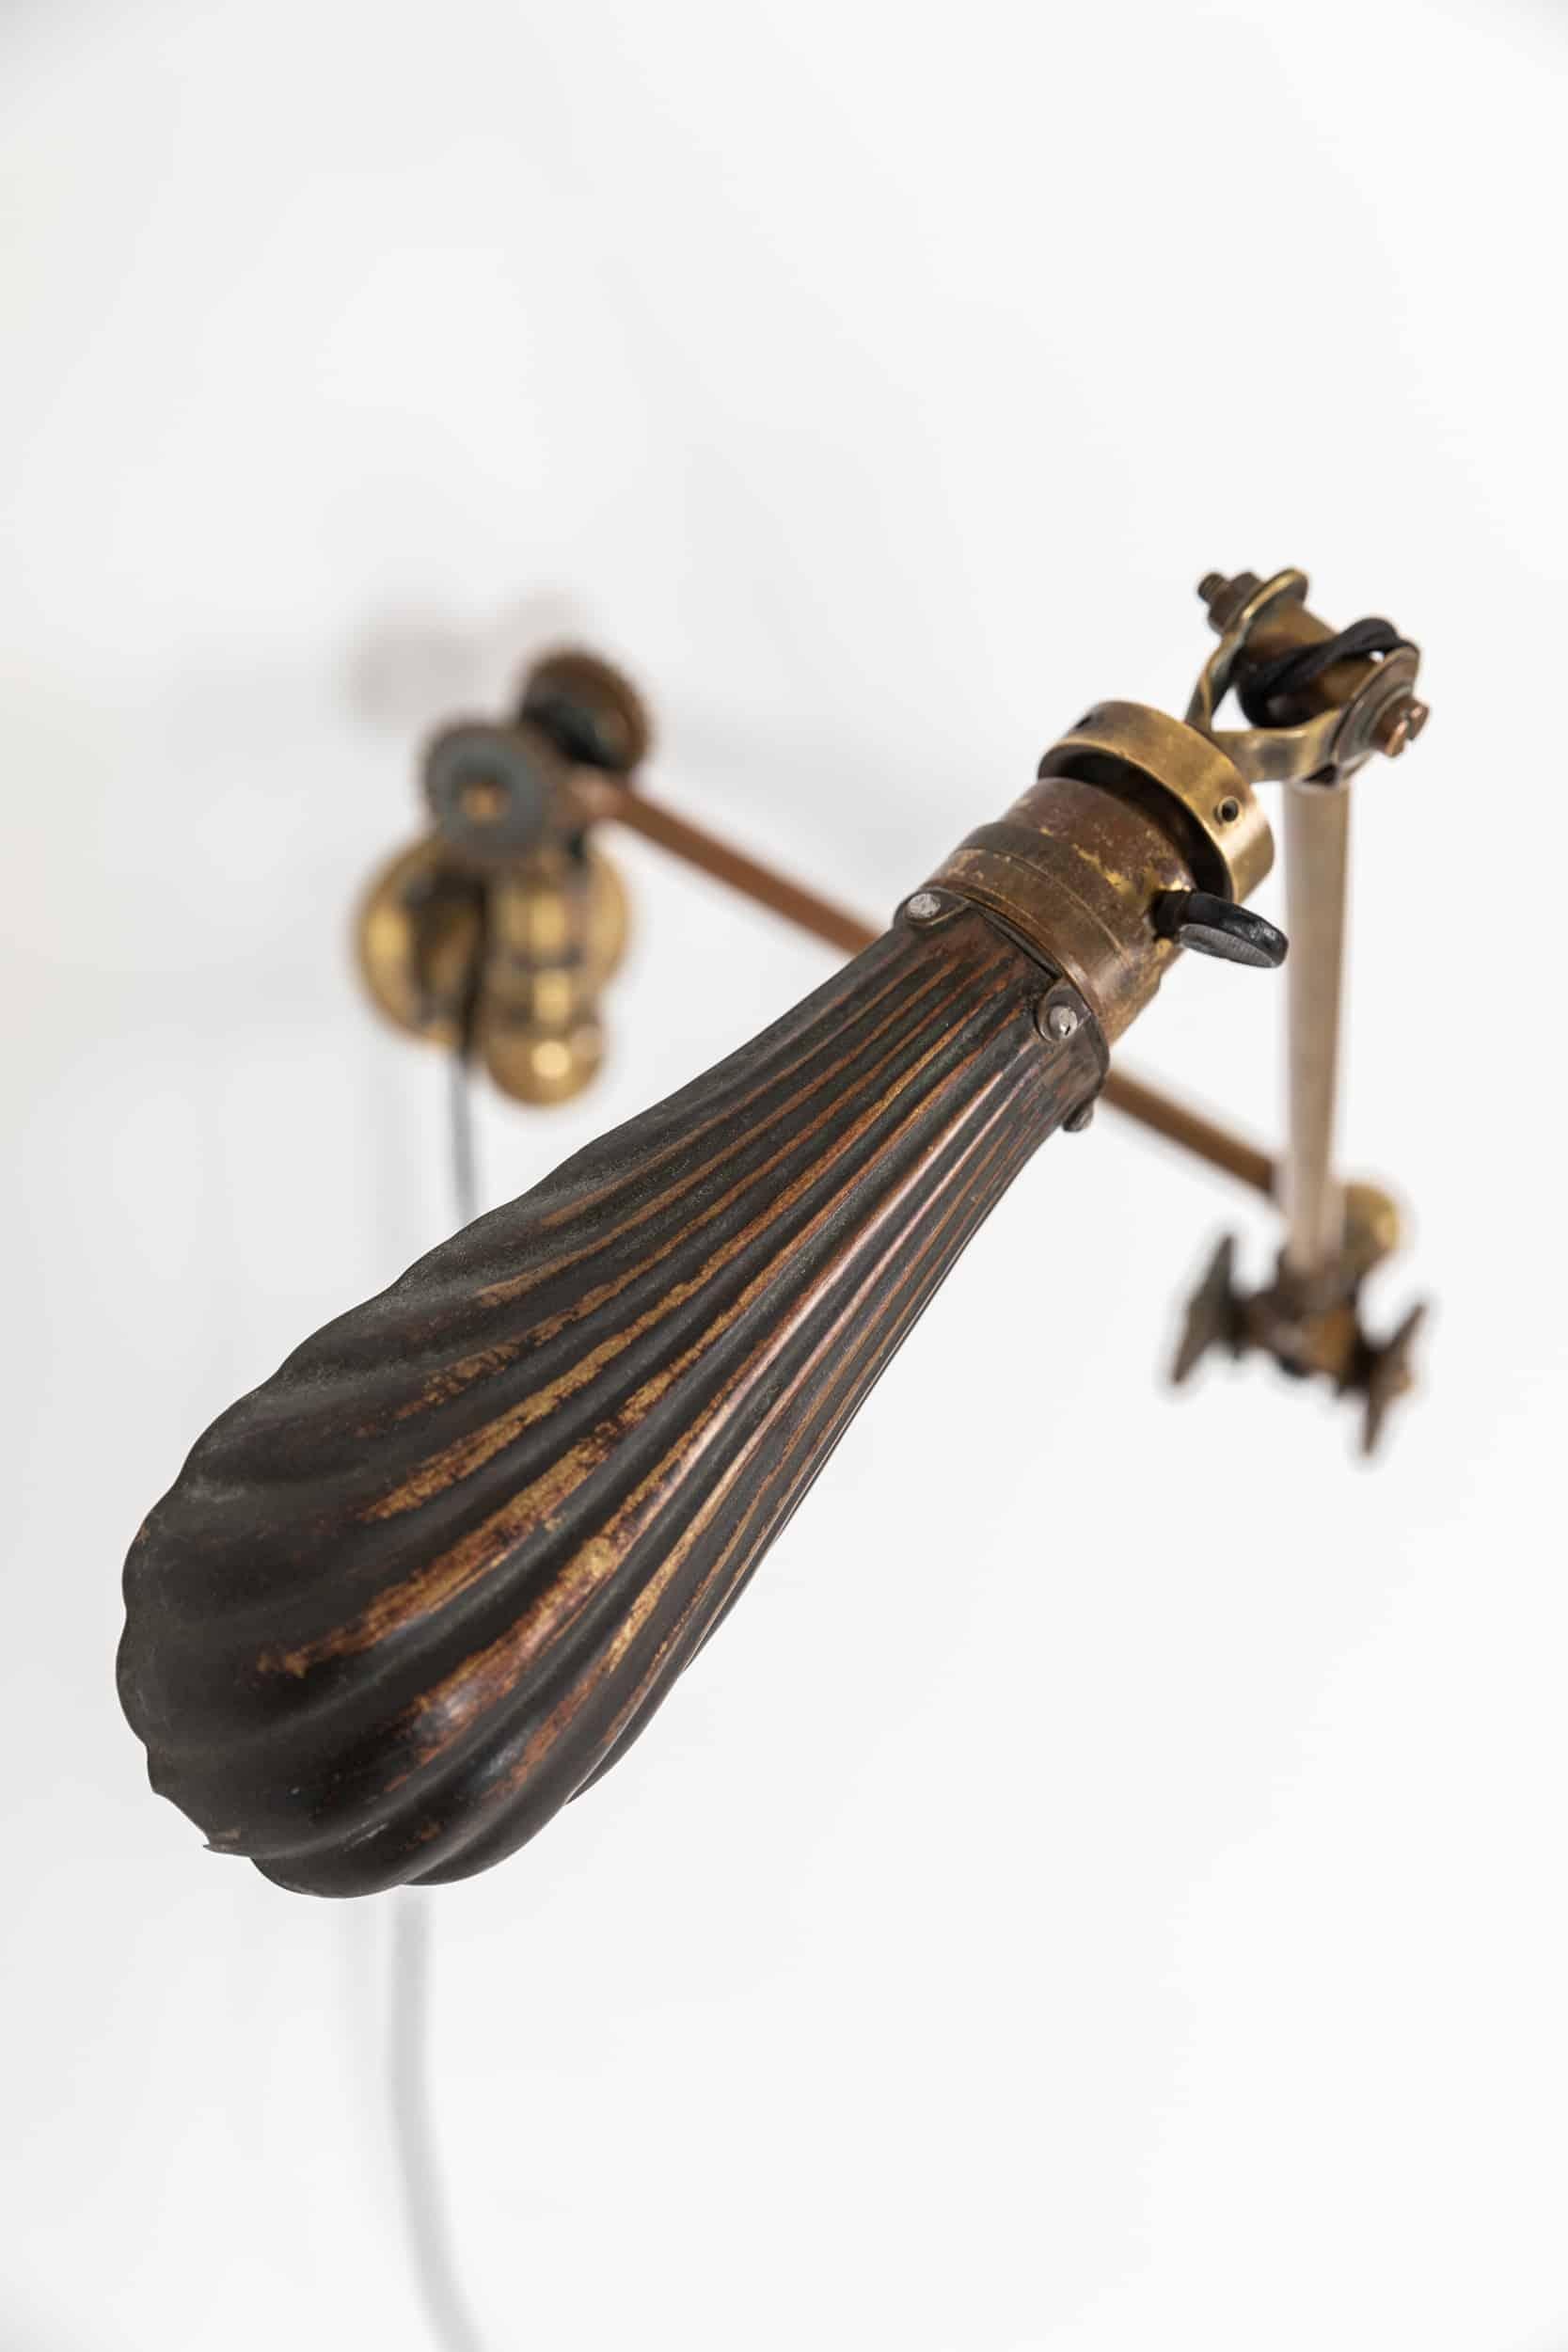 A stunning wall lamp by renowned English lighting company Dugdills. c.1920

This example, made entirely of brass, features the earlier 'rosettes' or daisy wheels for adjusting and tightening the joints into position and elongated shell